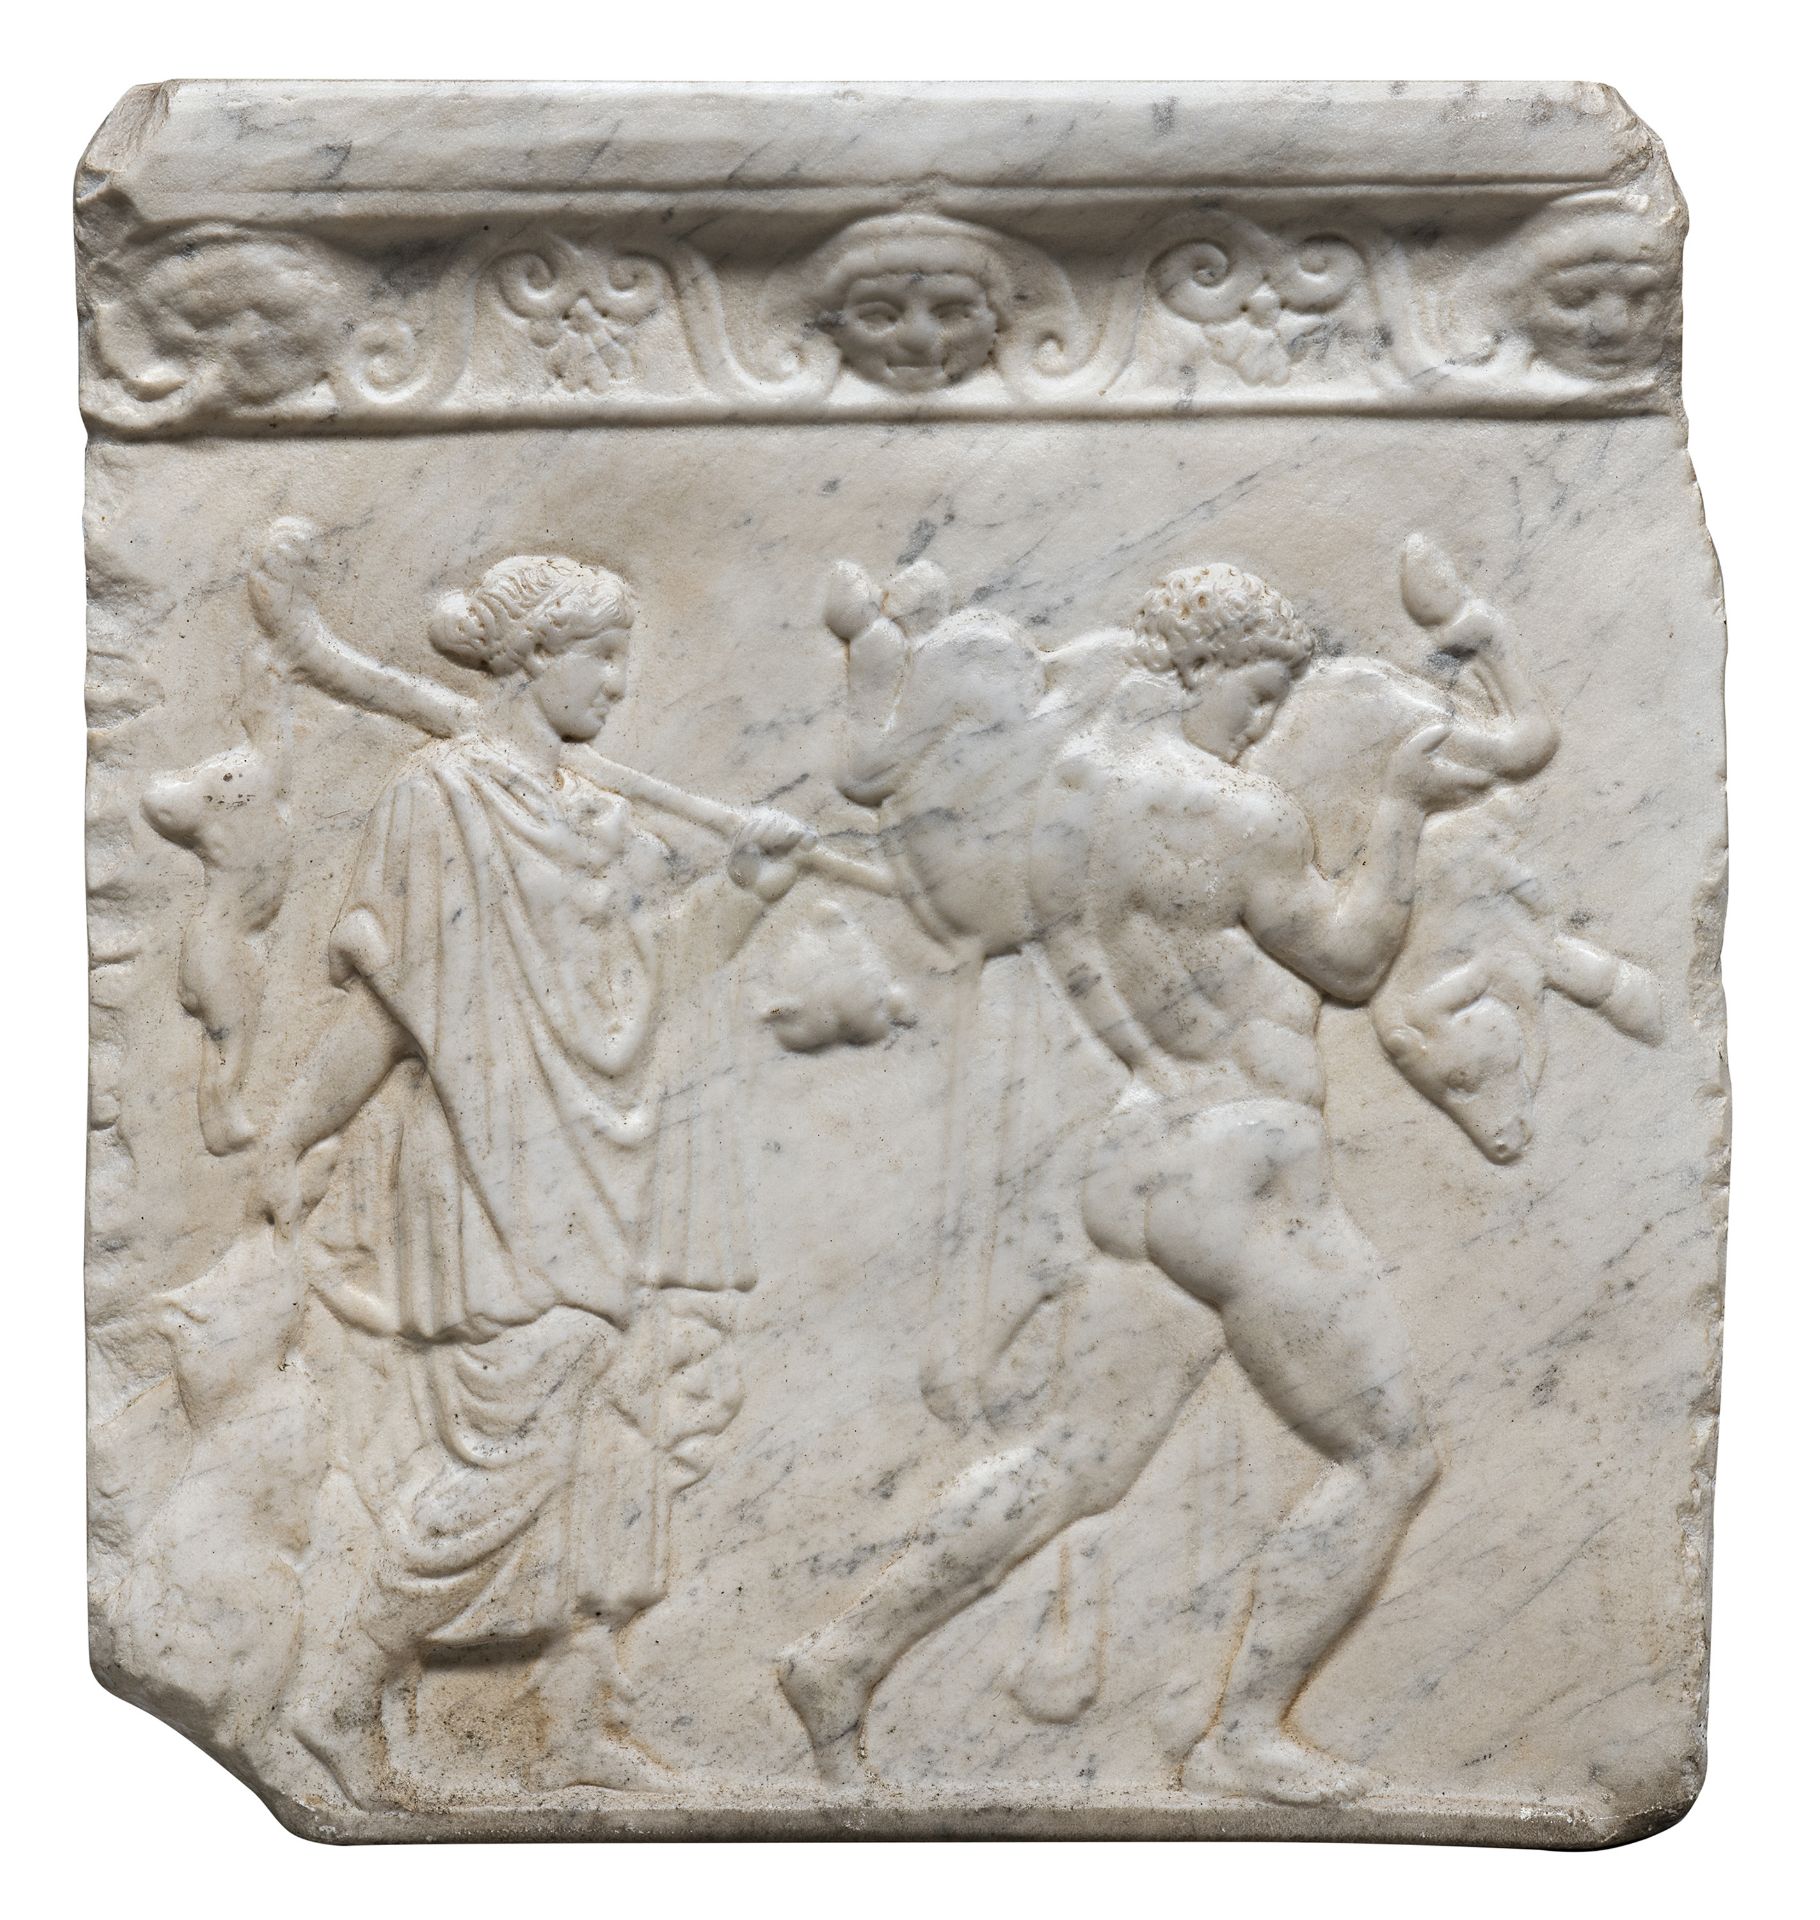 WHITE MARBLE BAS-RELIEF 19TH CENTURY